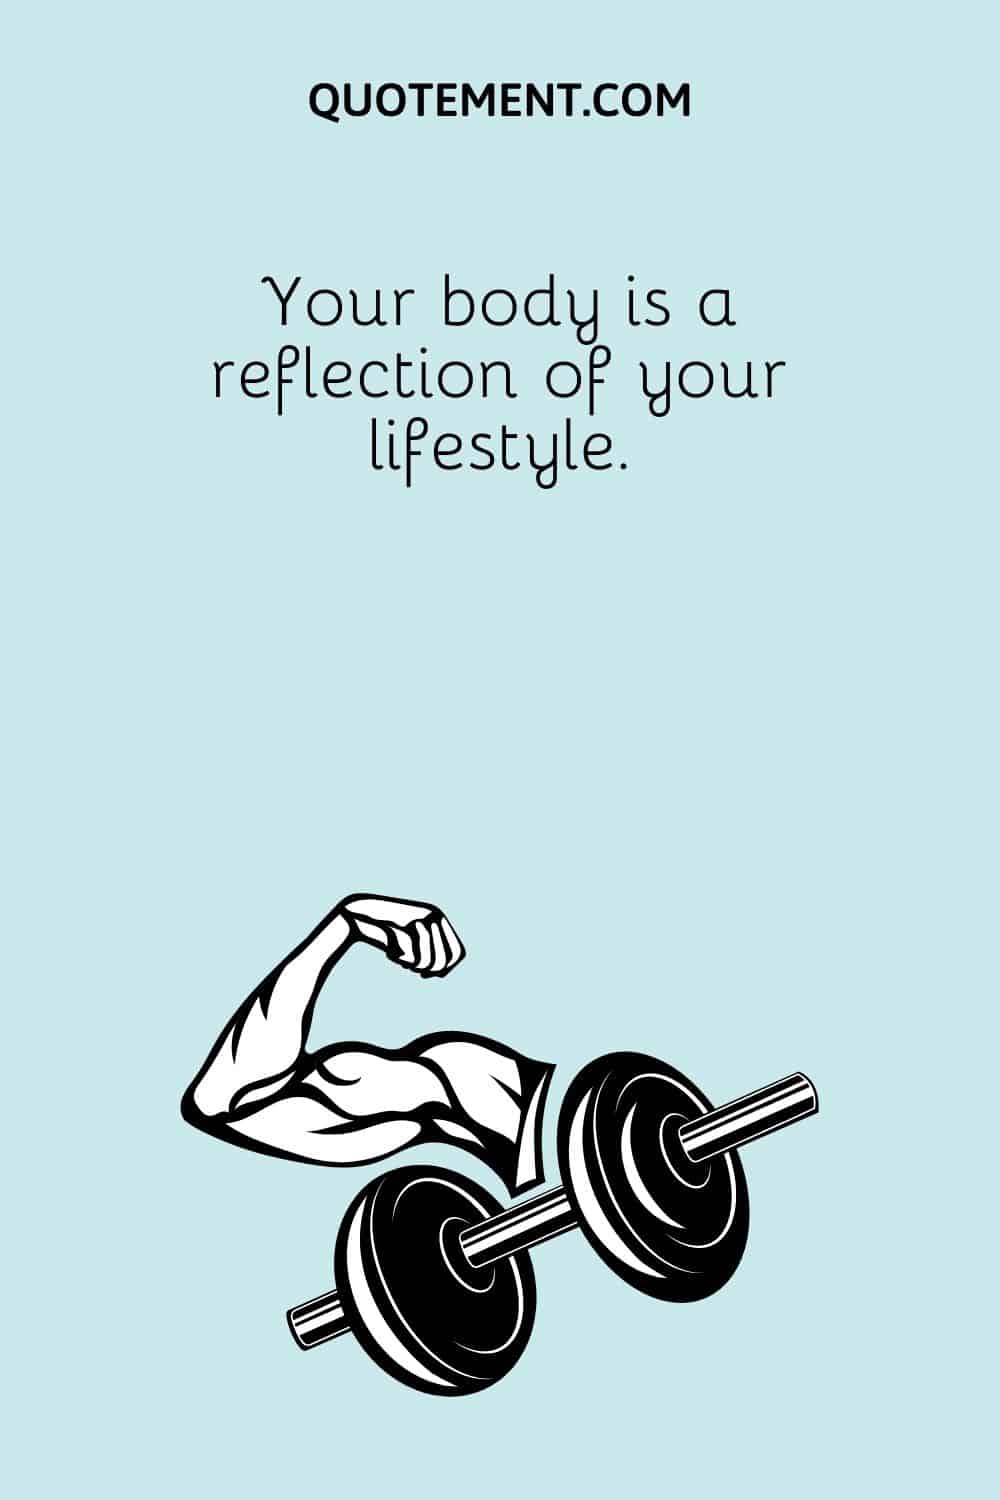 Your body is a reflection of your lifestyle.